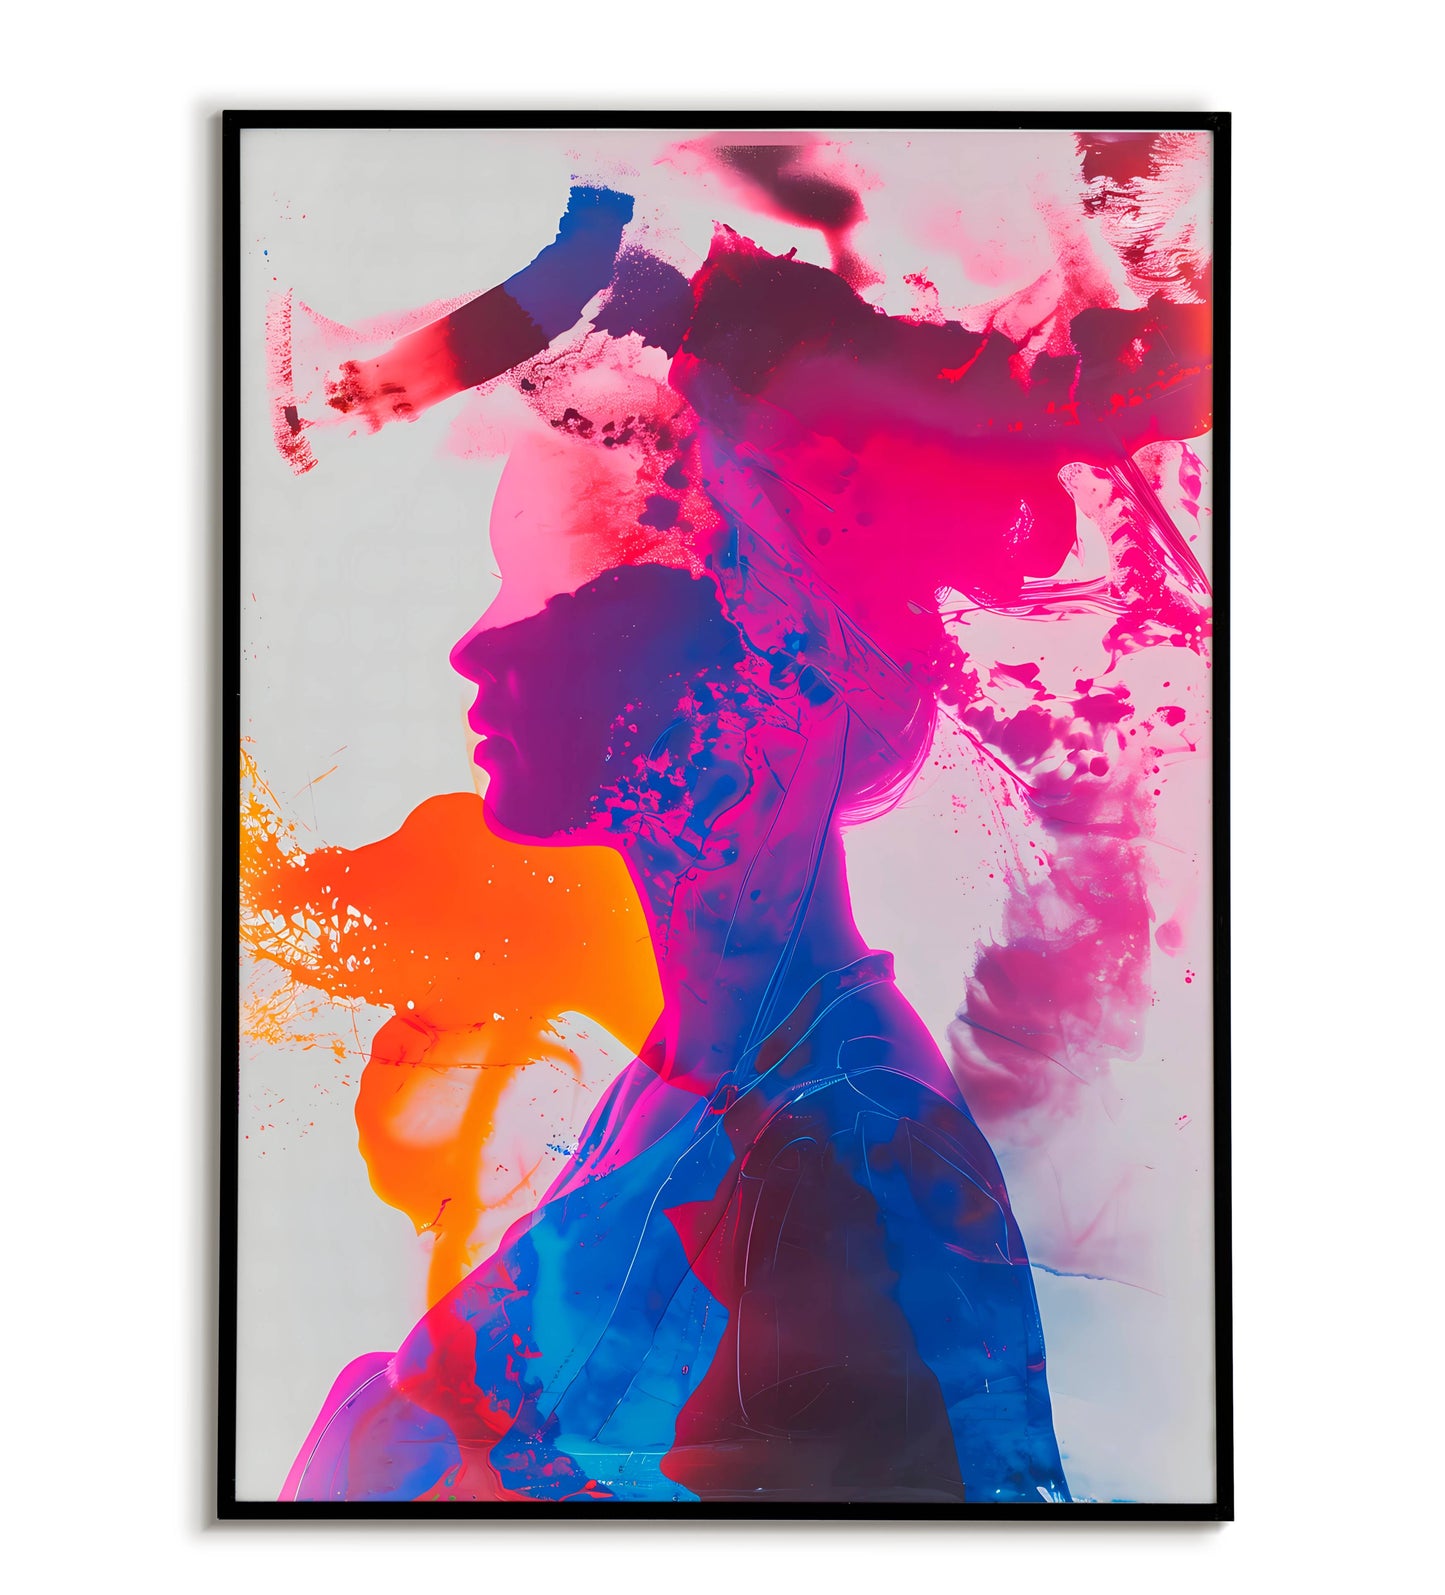 Woman Fluroscent Art - Printable Wall Art / Poster. Download this artistic design to add a touch of vibrant energy to your decor.